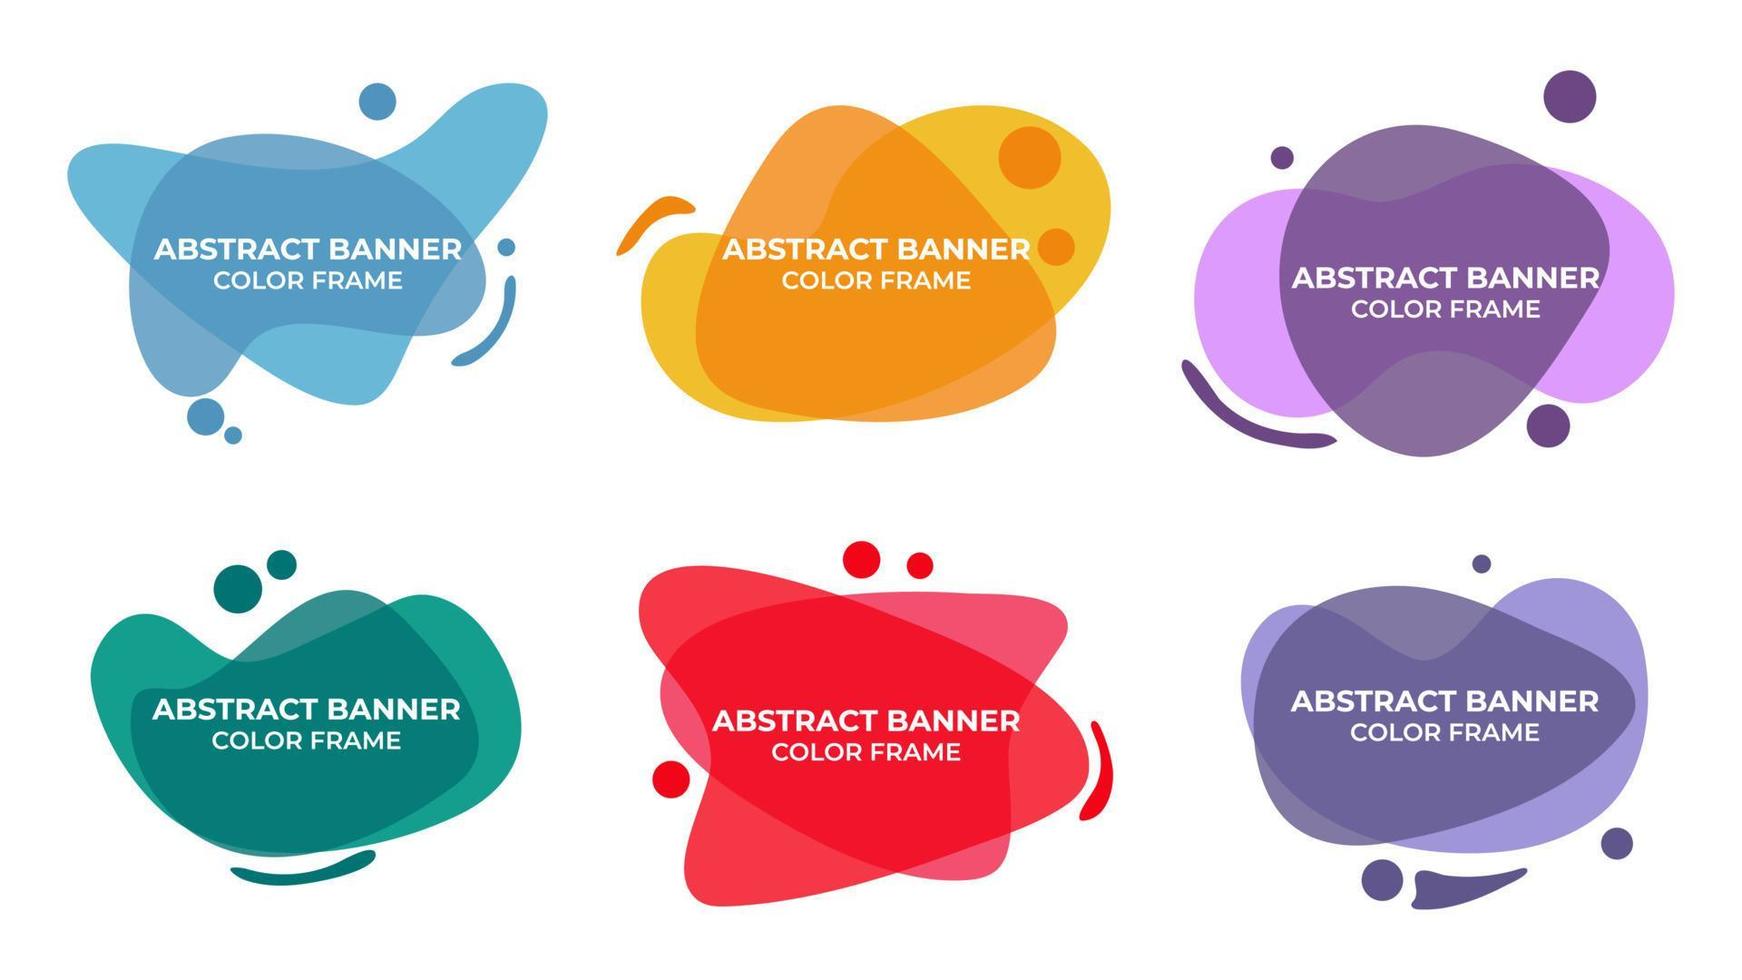 Abstract banner colors frame set vector